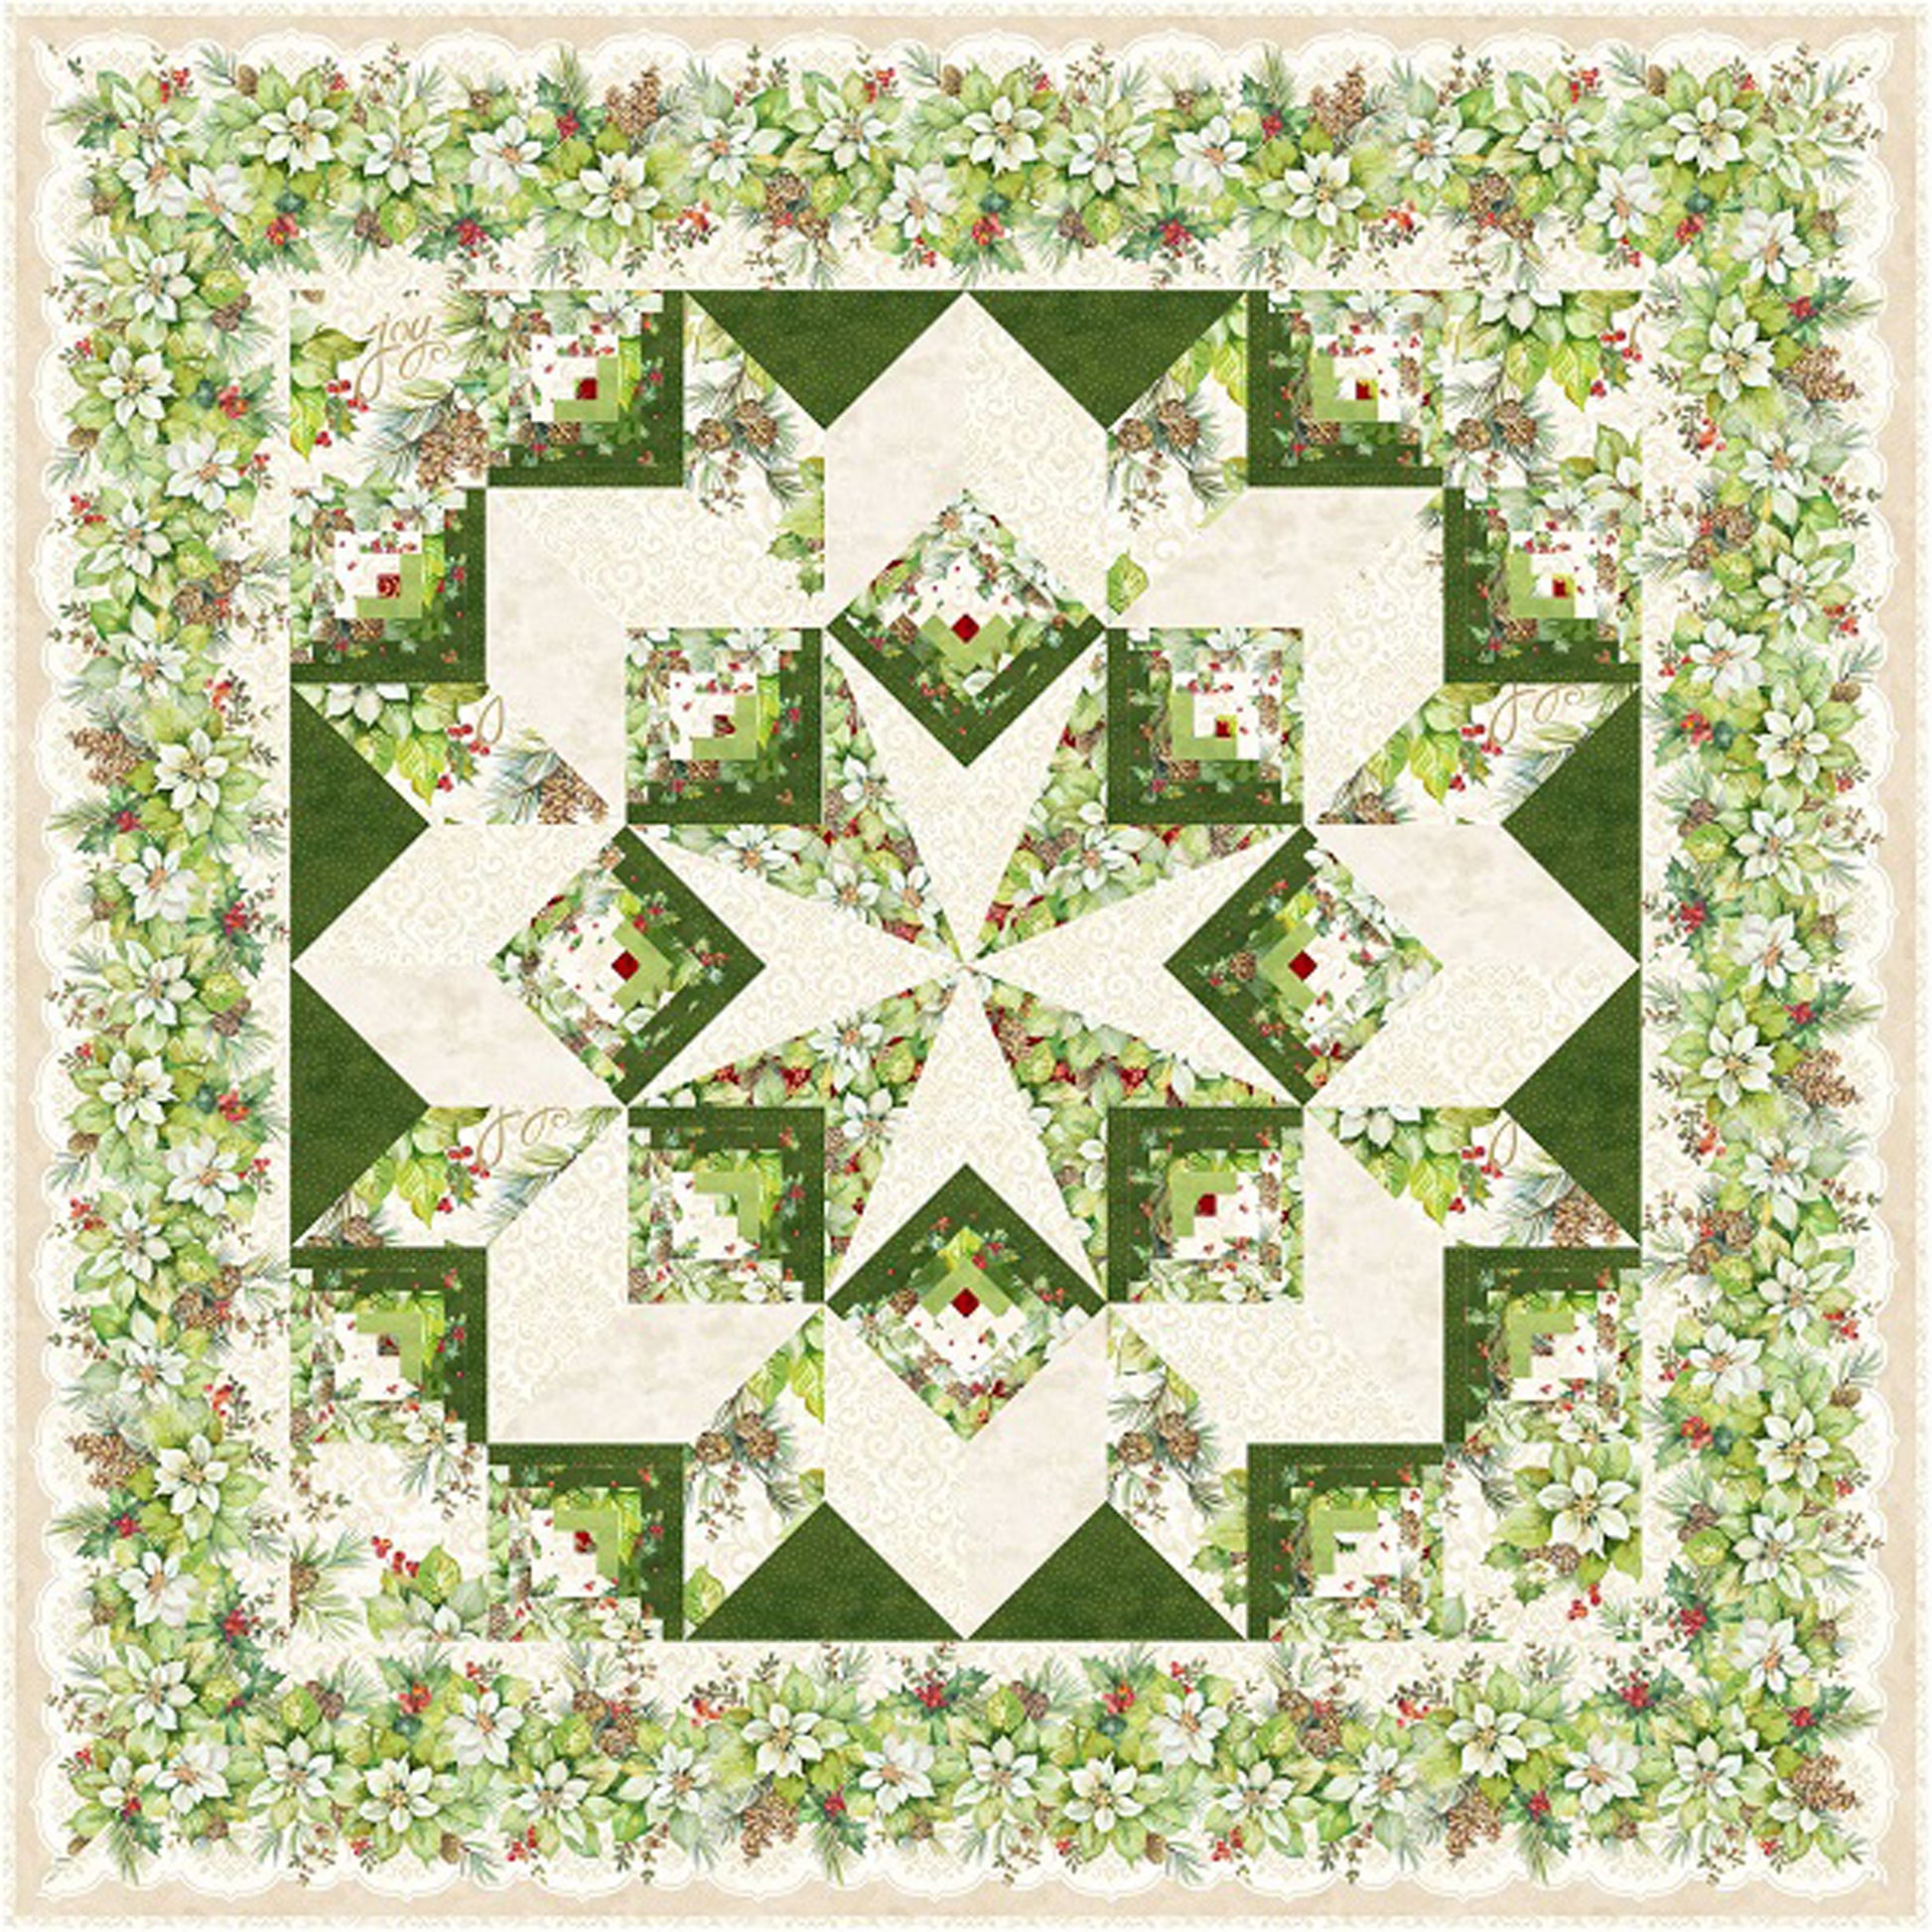 A beautiful quilted star design adorned with green leaves and berries fabric in greens and cream.